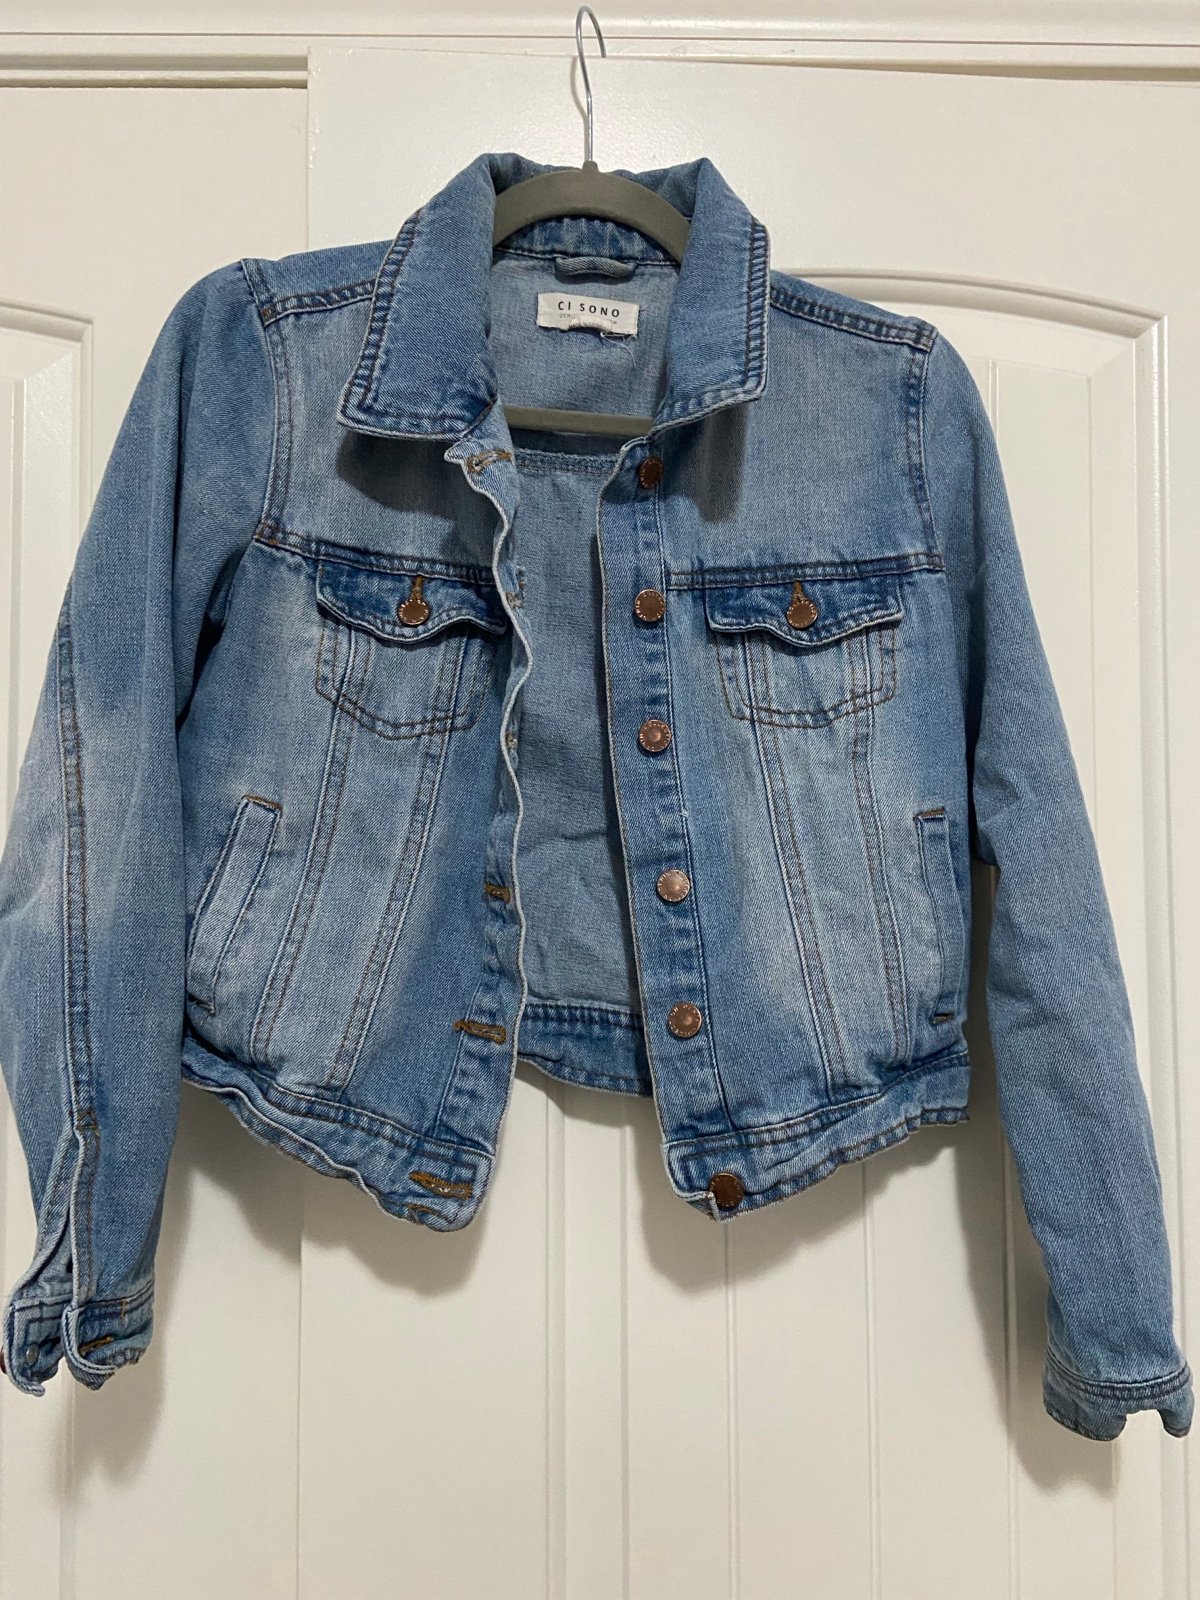 High quality Jean Jacket otgz90yc7 Outlet Store